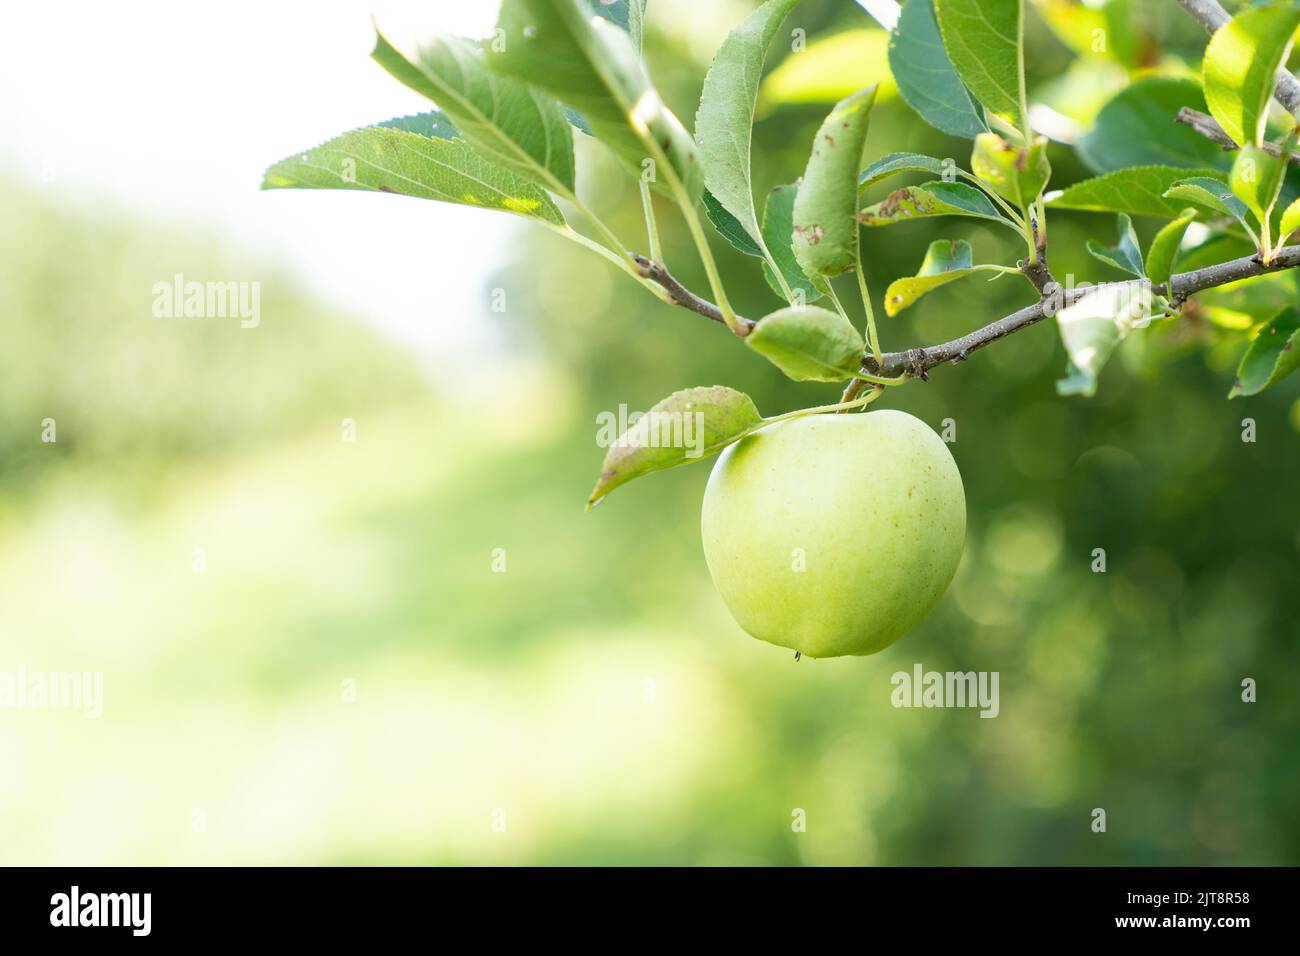 Ripe green apple on a branch of an apple tree Stock Photo